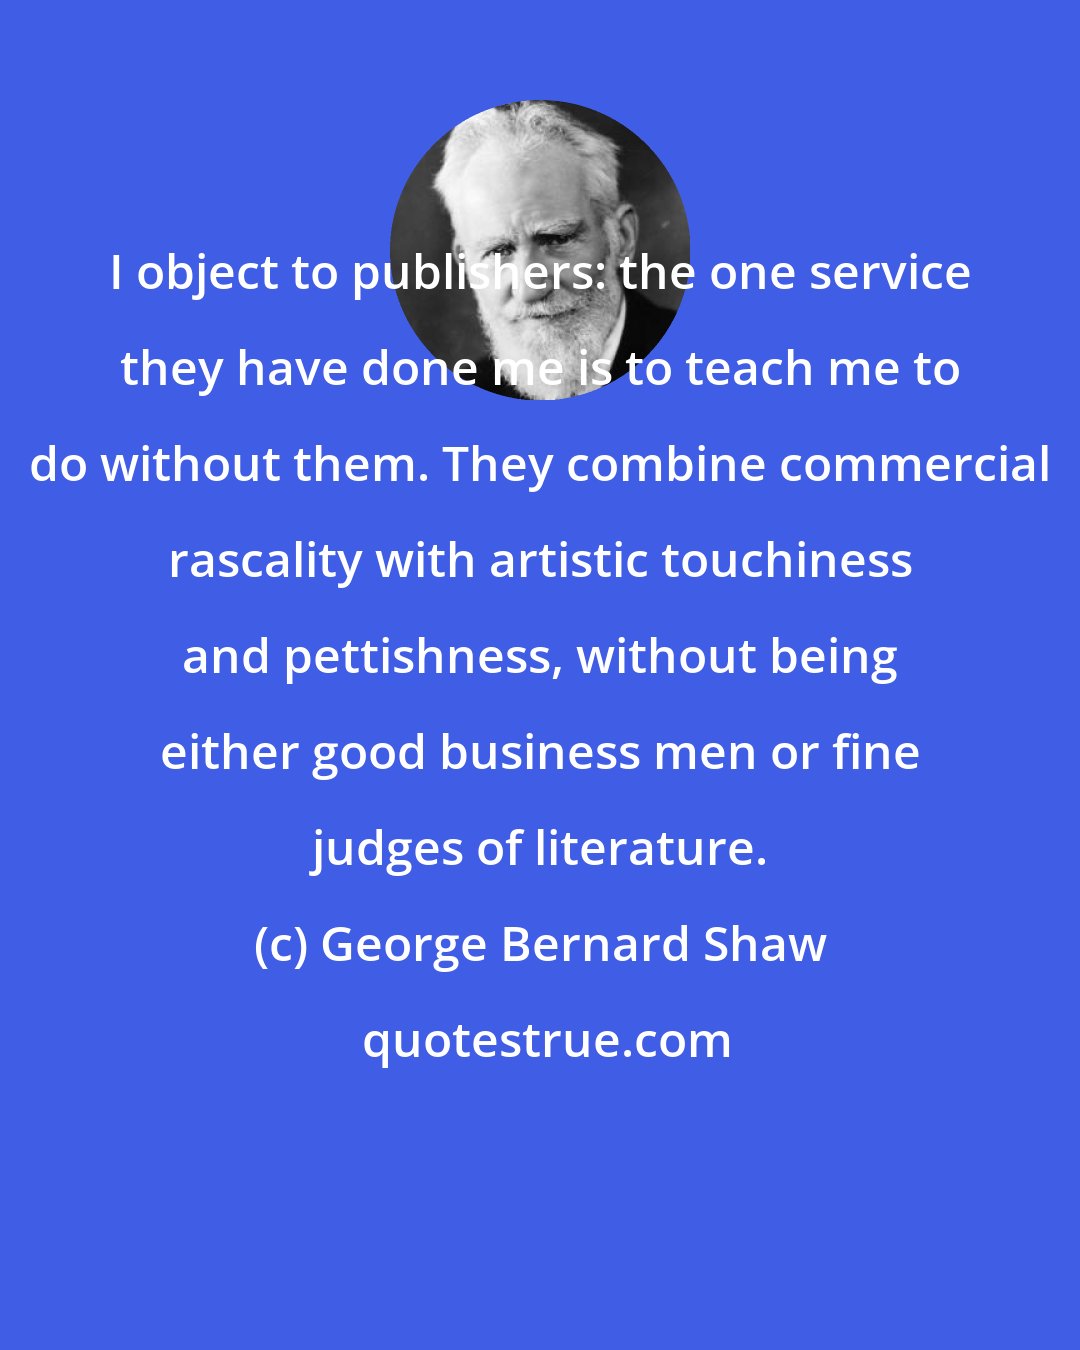 George Bernard Shaw: I object to publishers: the one service they have done me is to teach me to do without them. They combine commercial rascality with artistic touchiness and pettishness, without being either good business men or fine judges of literature.